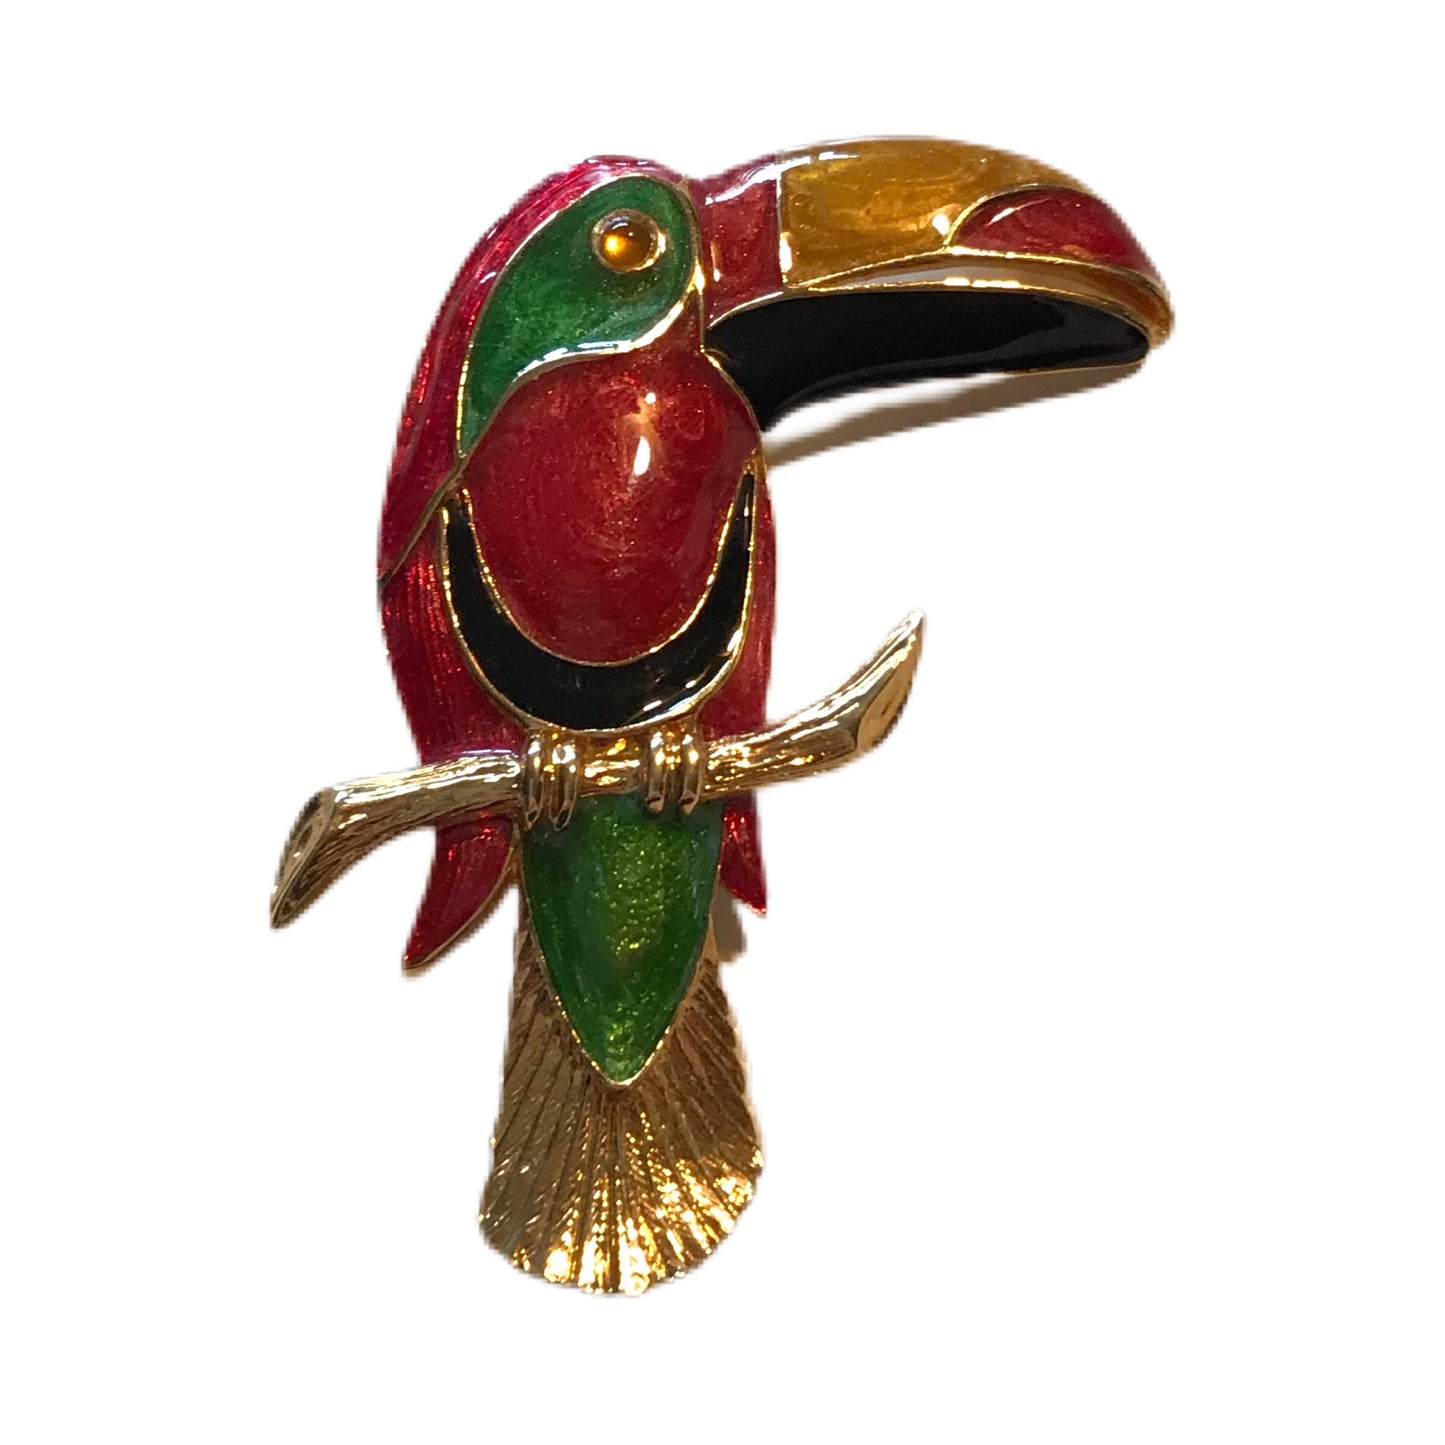 Huge Red and Green Enameled Toucan Brooch circa 1970s